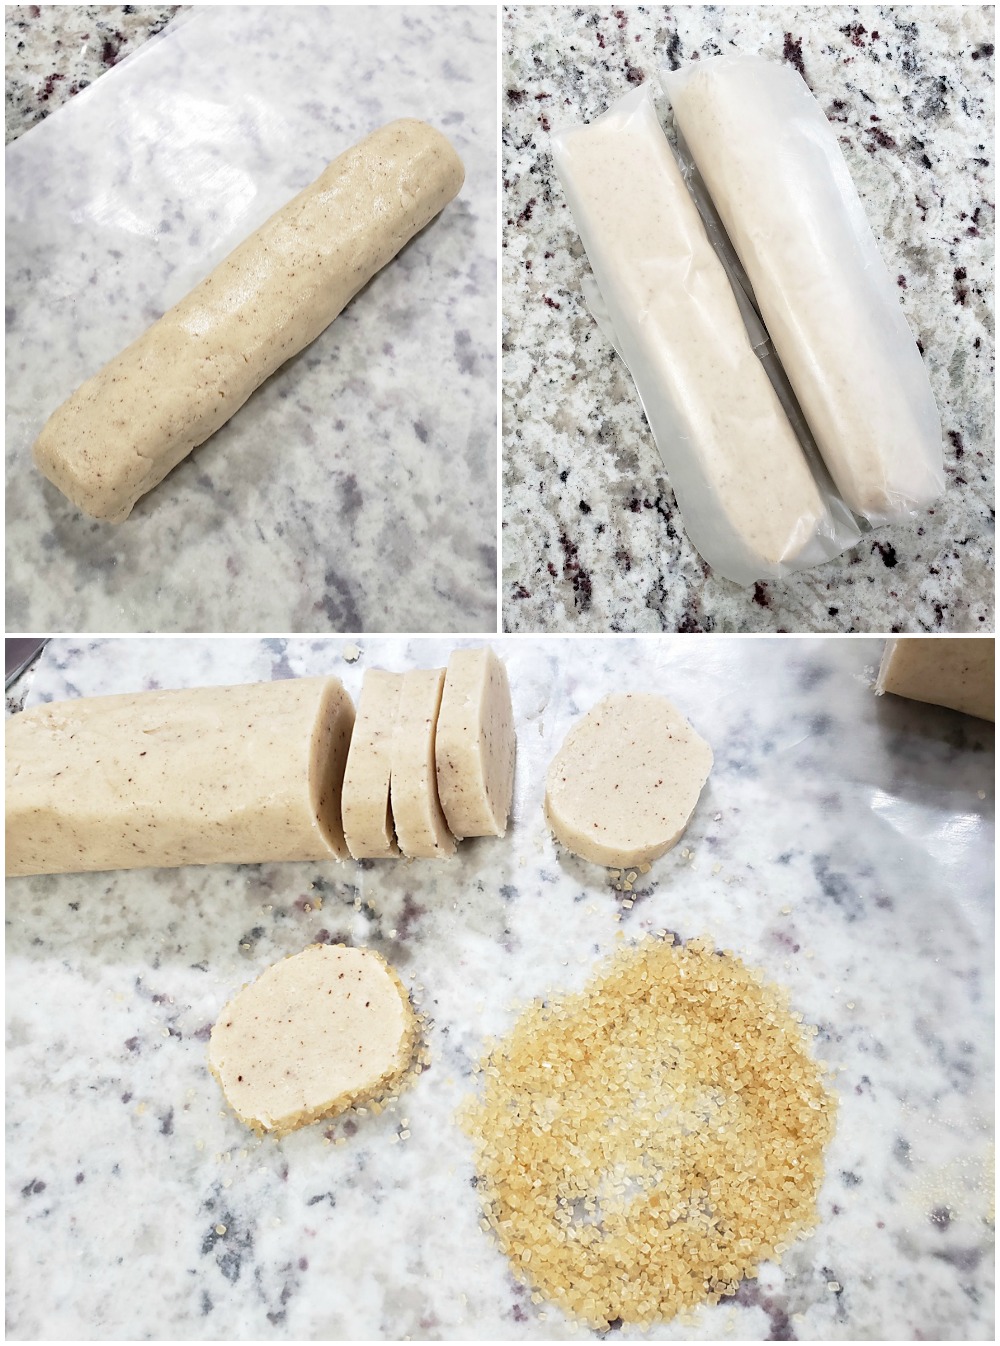 Cookie dough rolled into tubes for slicing.